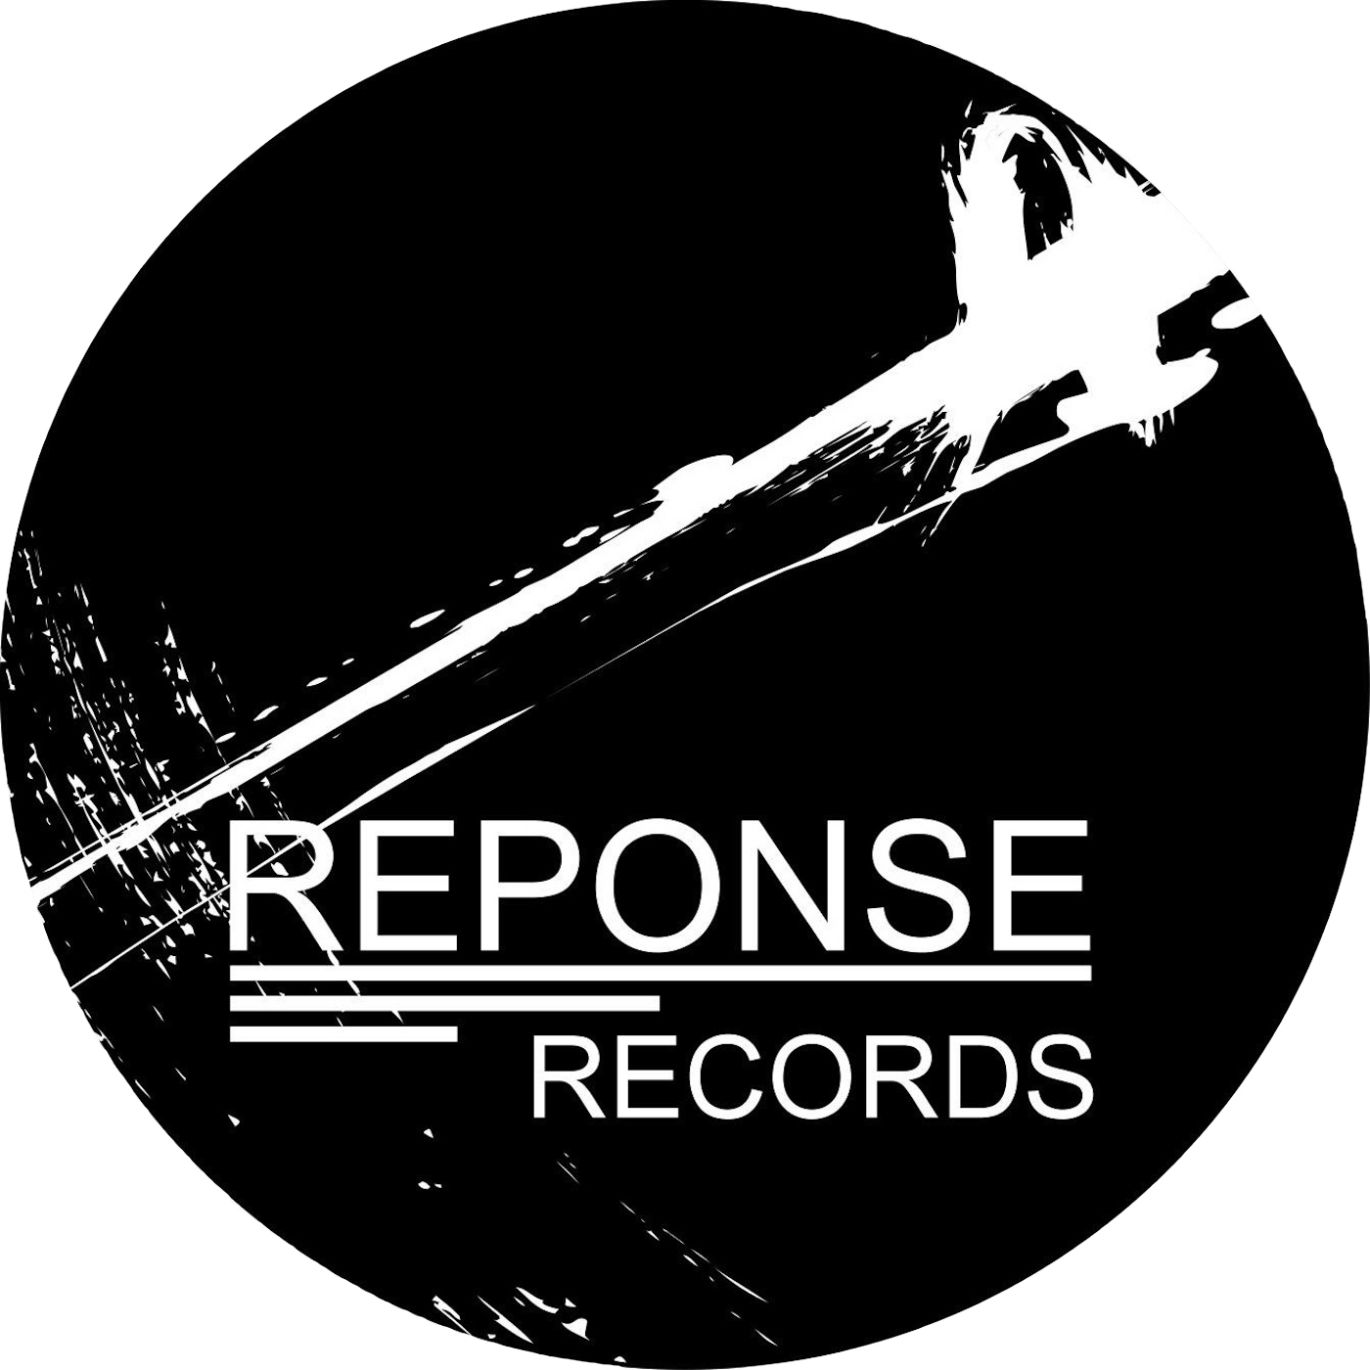 Reponse Records Label